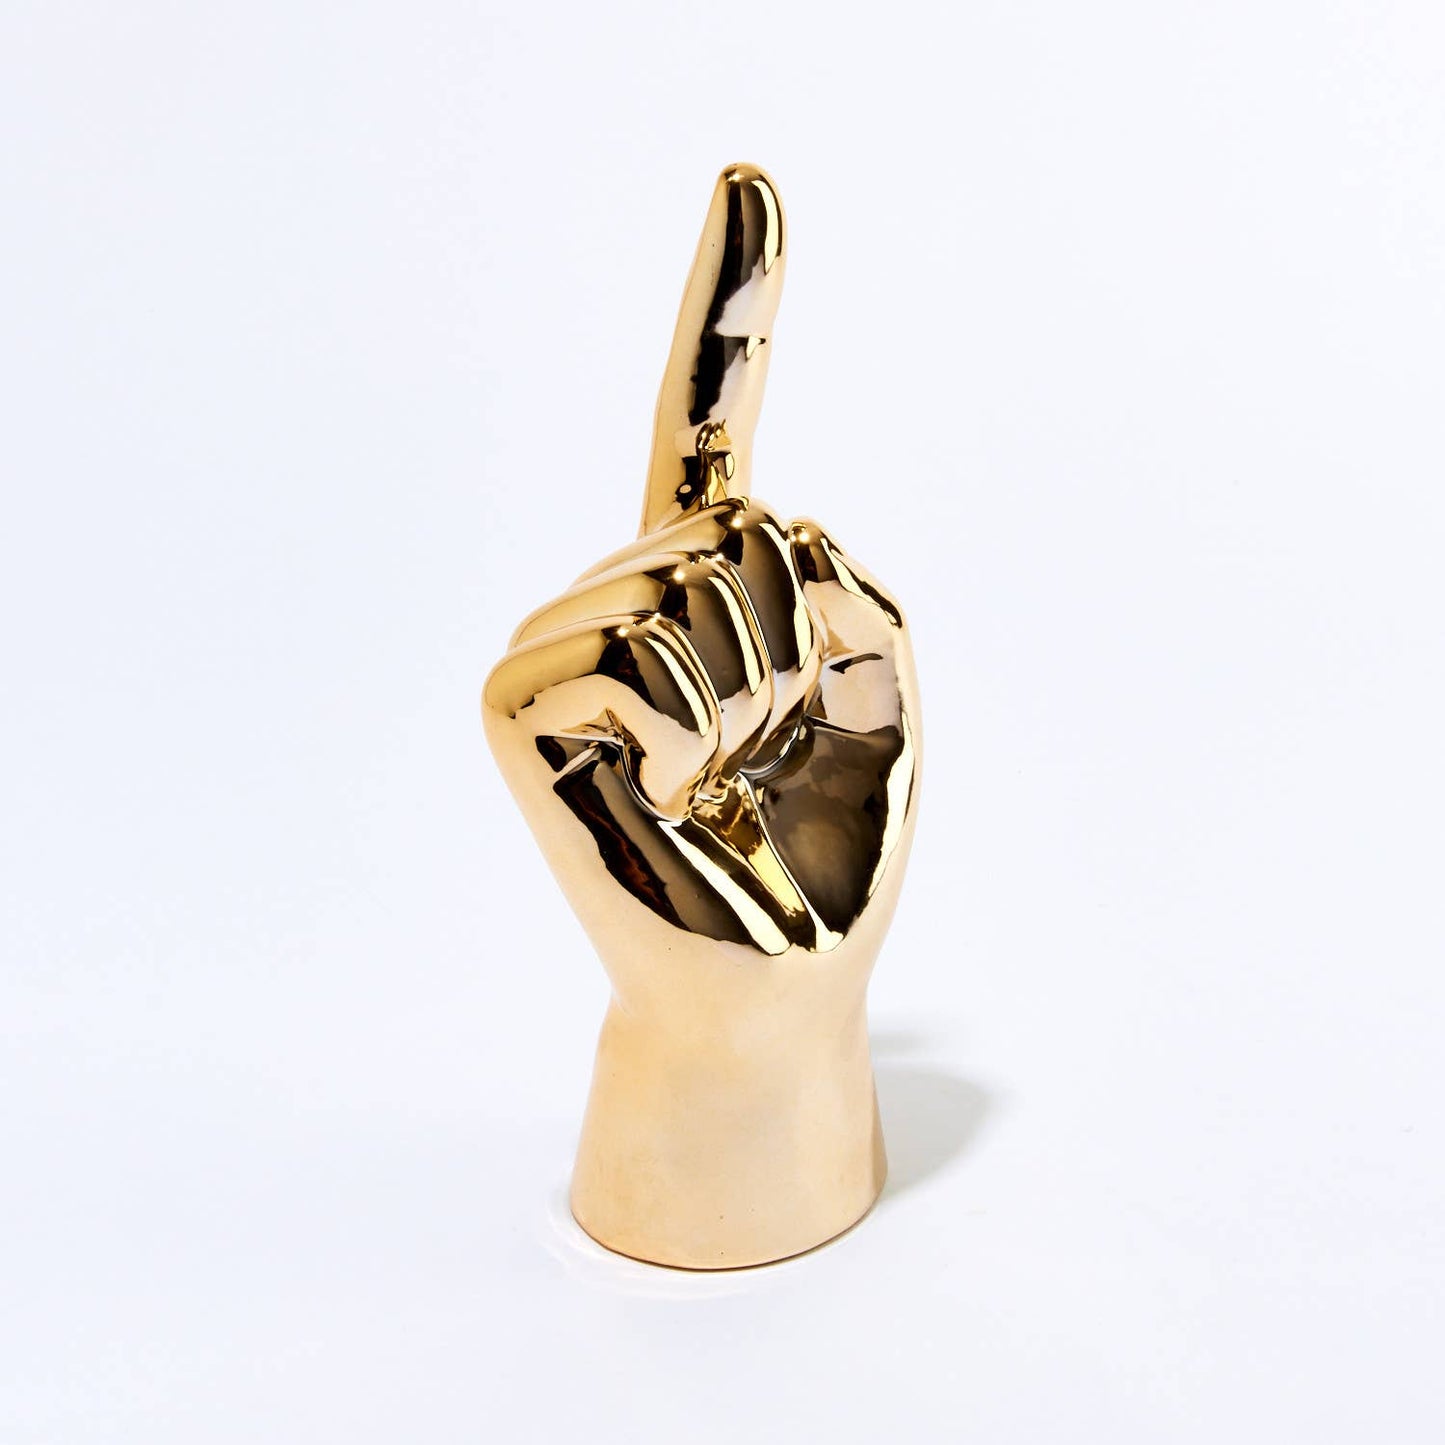 Gold Finger Pointing hand Tabletop decor - 9" tall